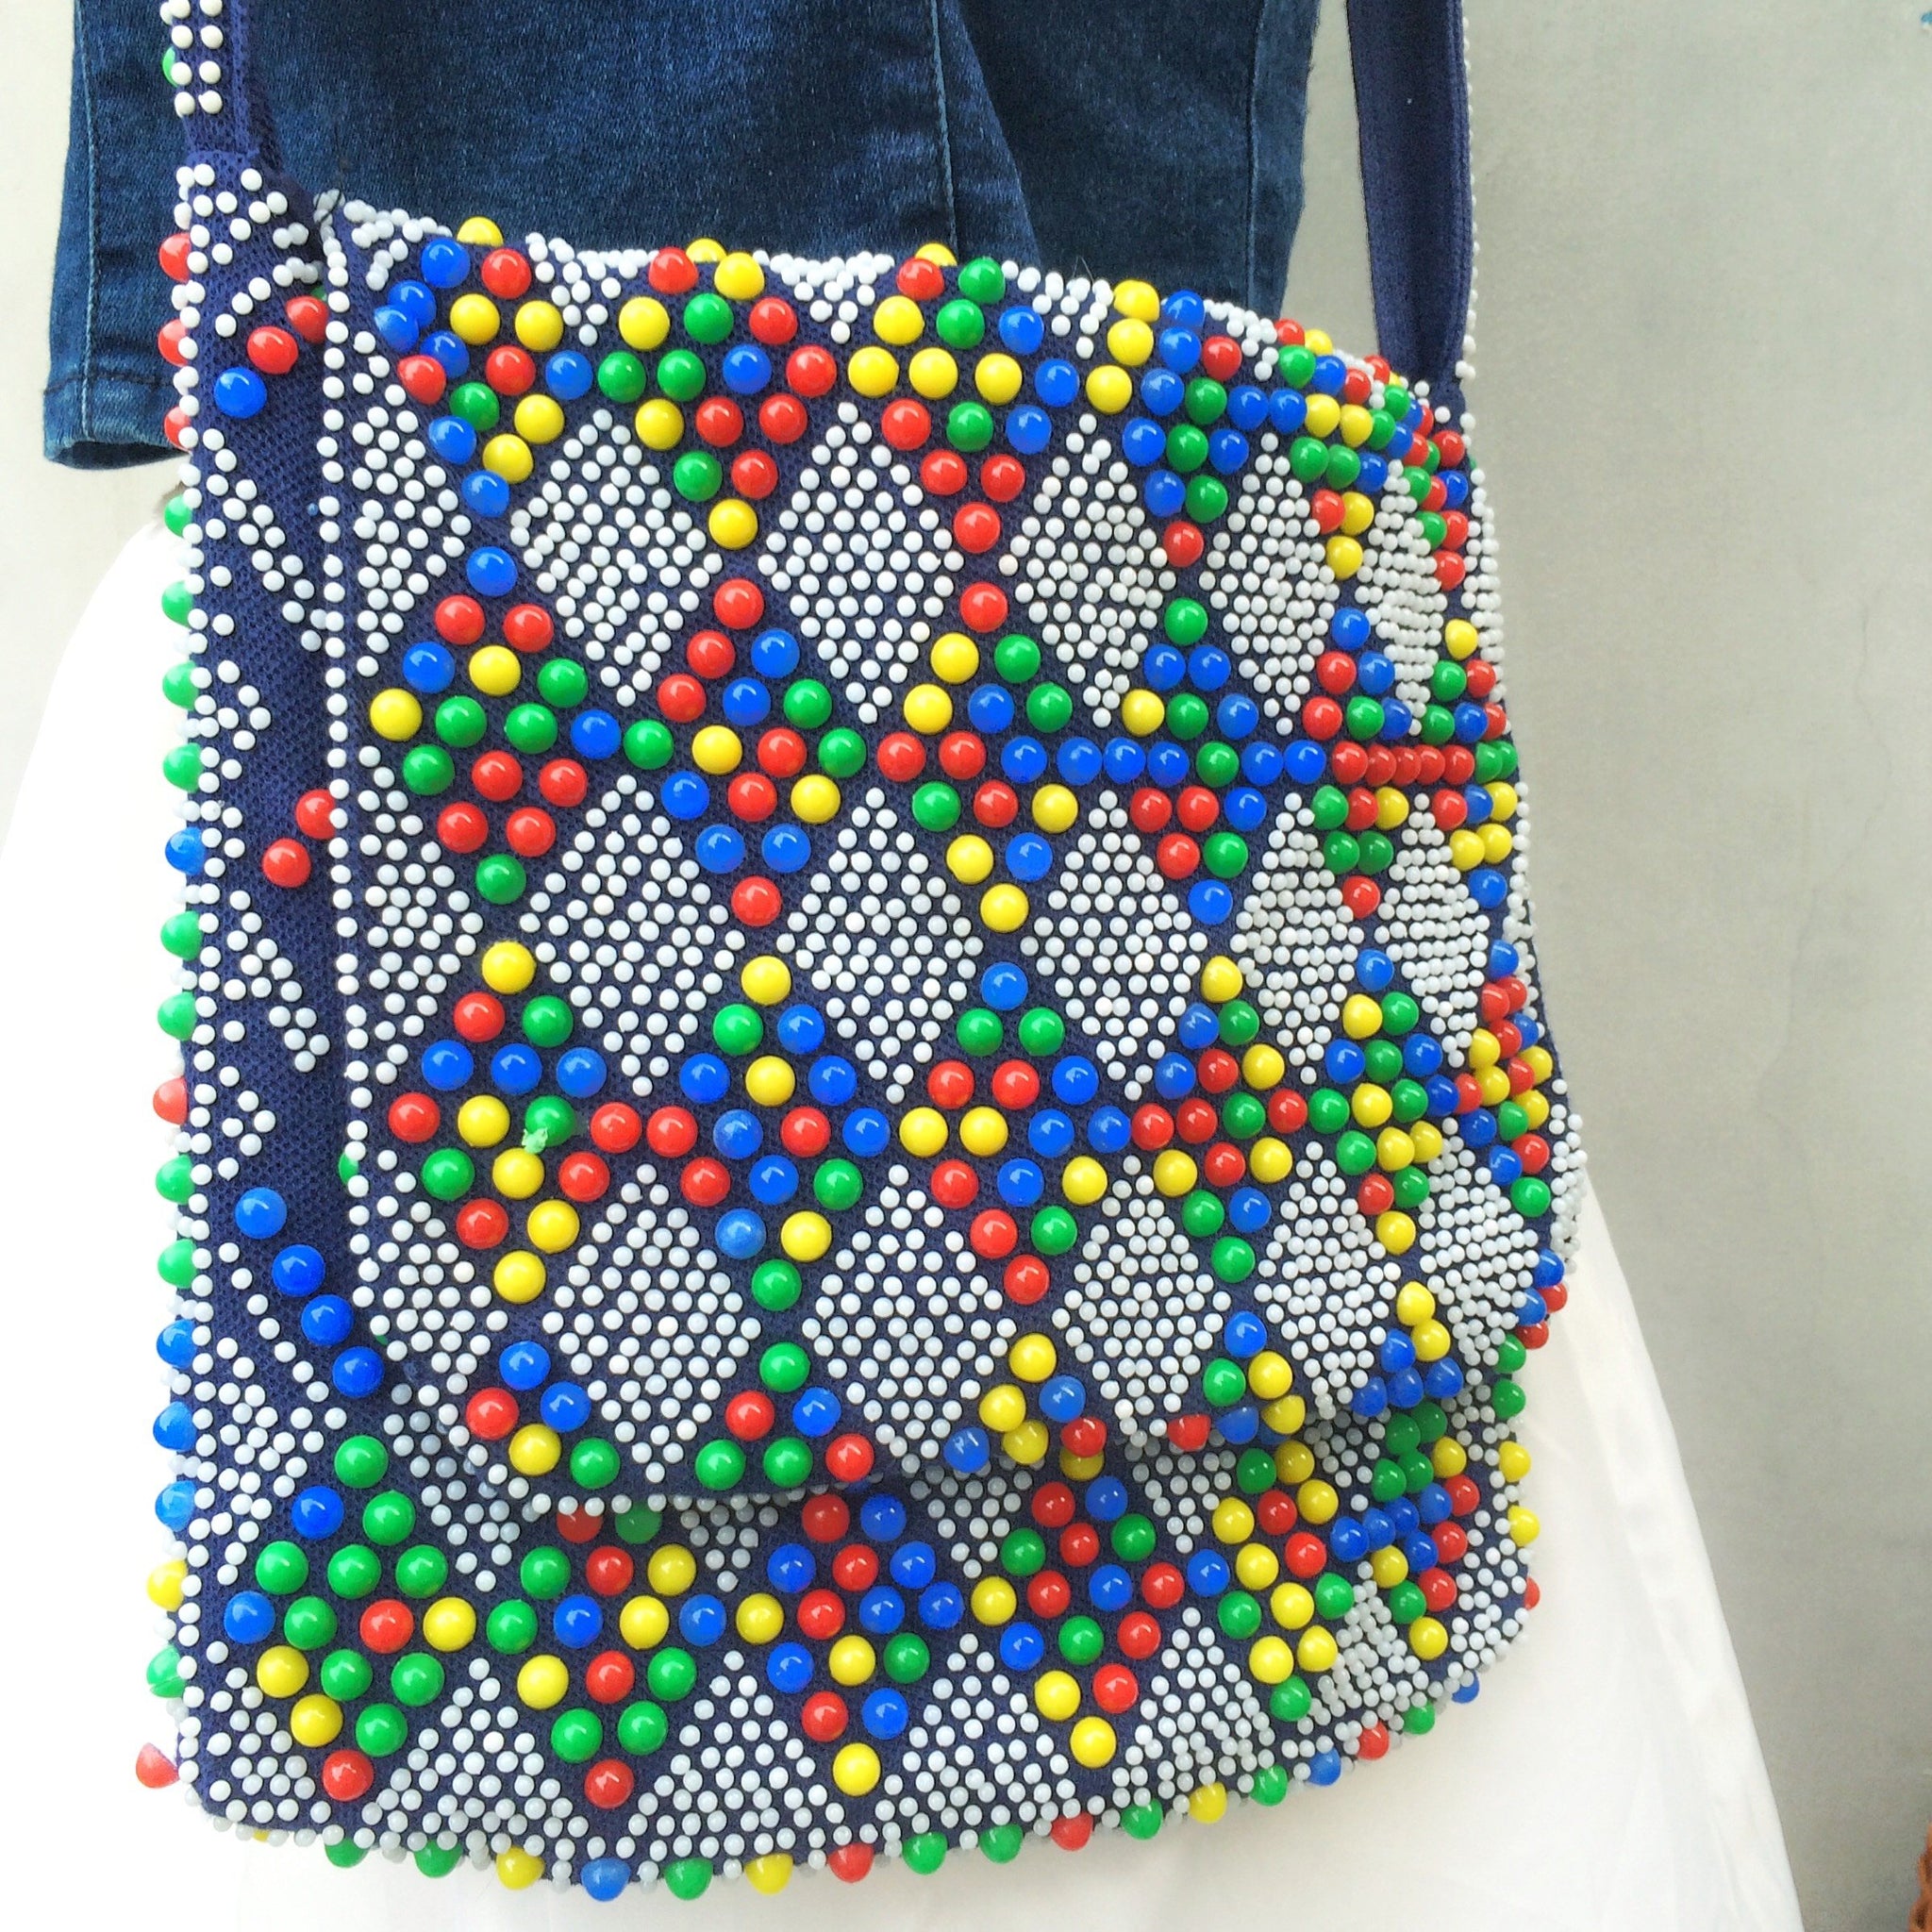 Sweet Tooth | Vintage 1960s 1970s Hippie Flower Power Boho chick chic Beaded Shoulder Sling Bag